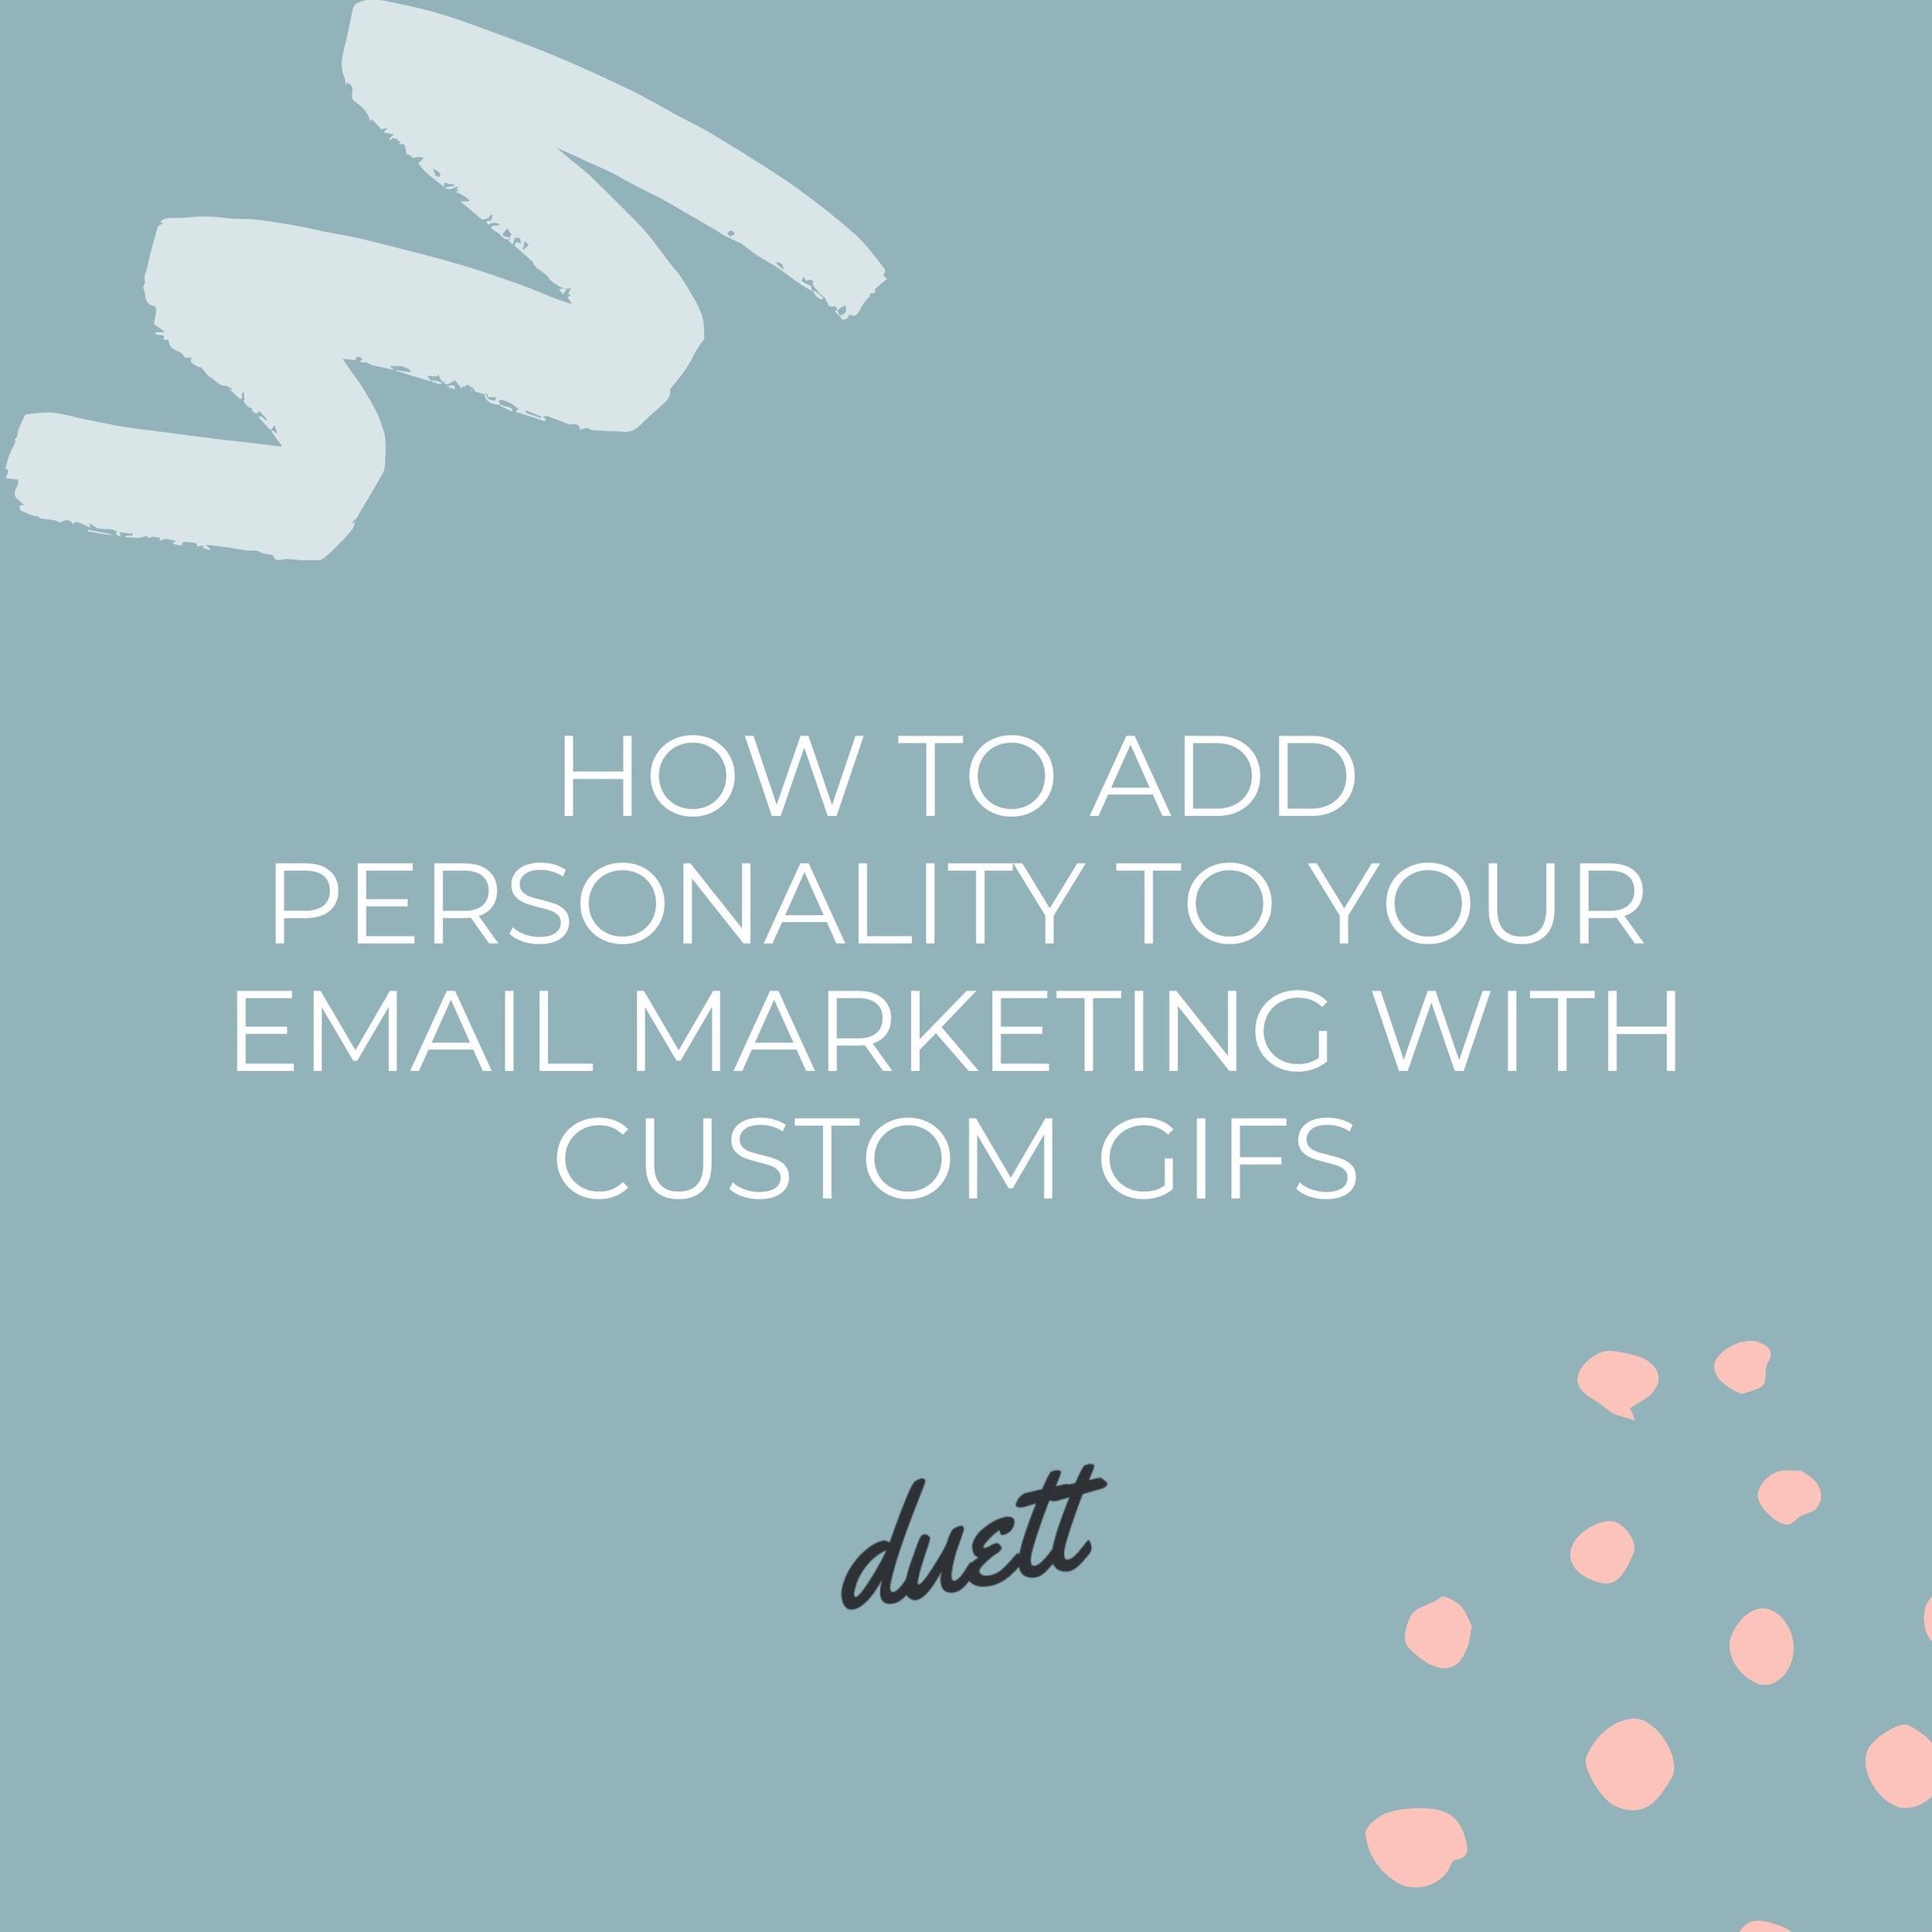 How to Add Personality to your Email Marketing with Custom Gifs